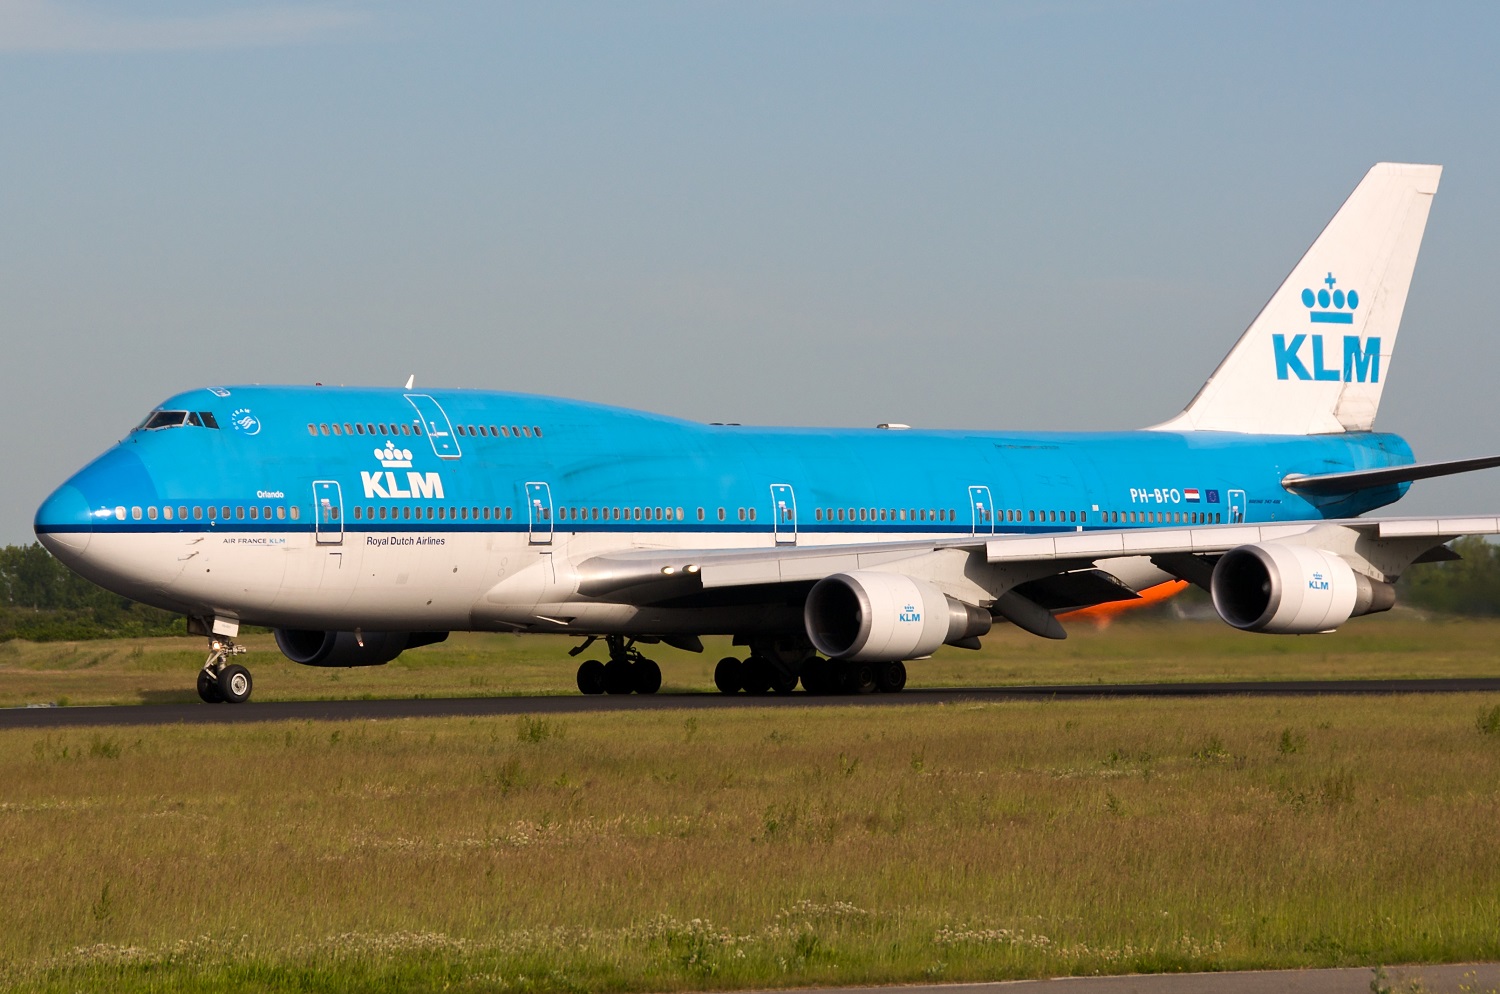 KLM says it will scrap some flights to China due to the coronavirus outbreak